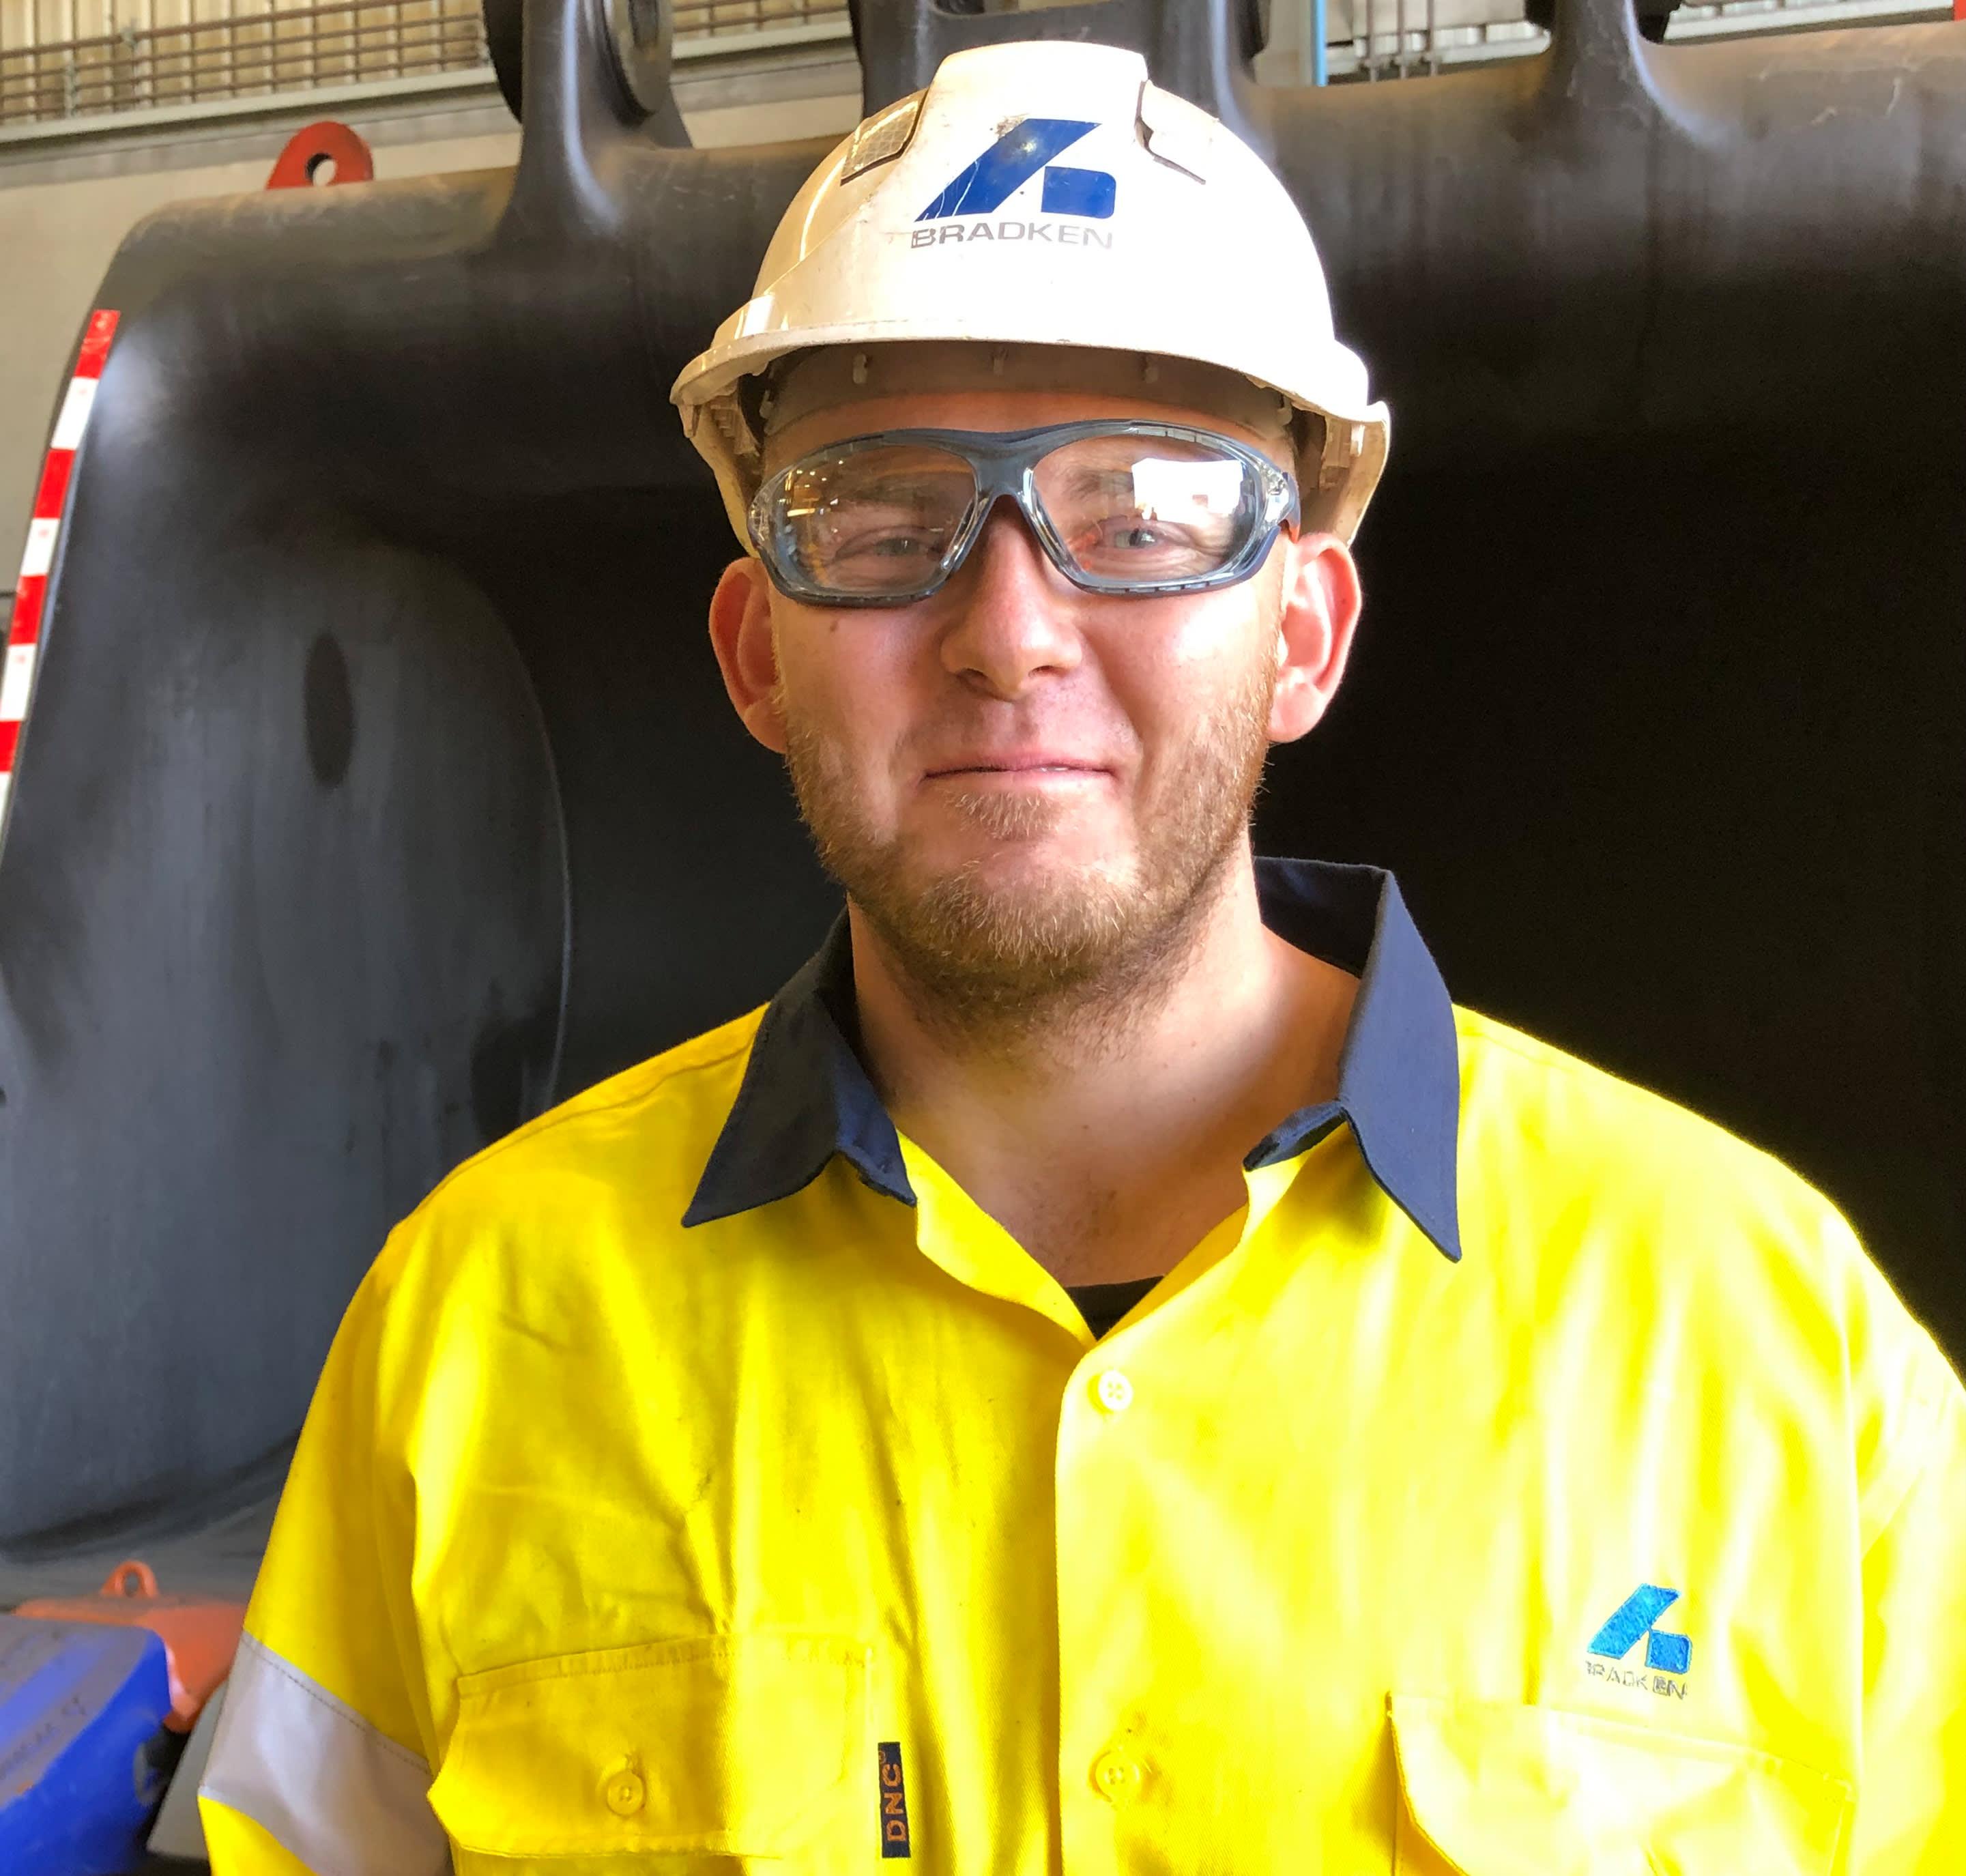 2023 first year Boilermaker apprentice Charlie Watson from Mt Thorley